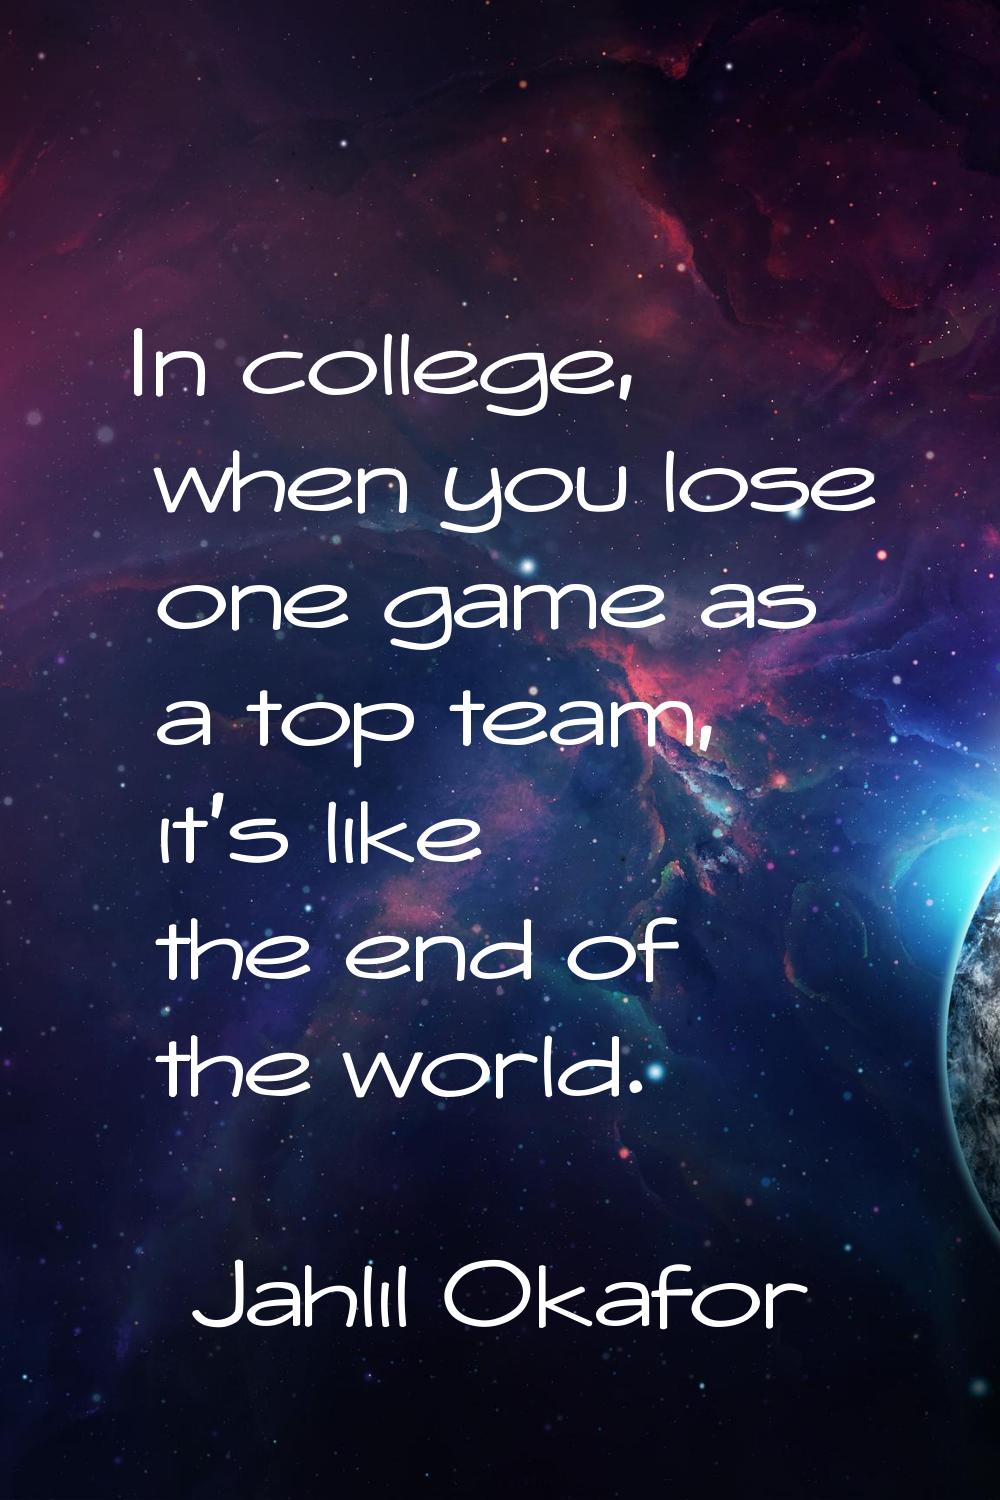 In college, when you lose one game as a top team, it's like the end of the world.